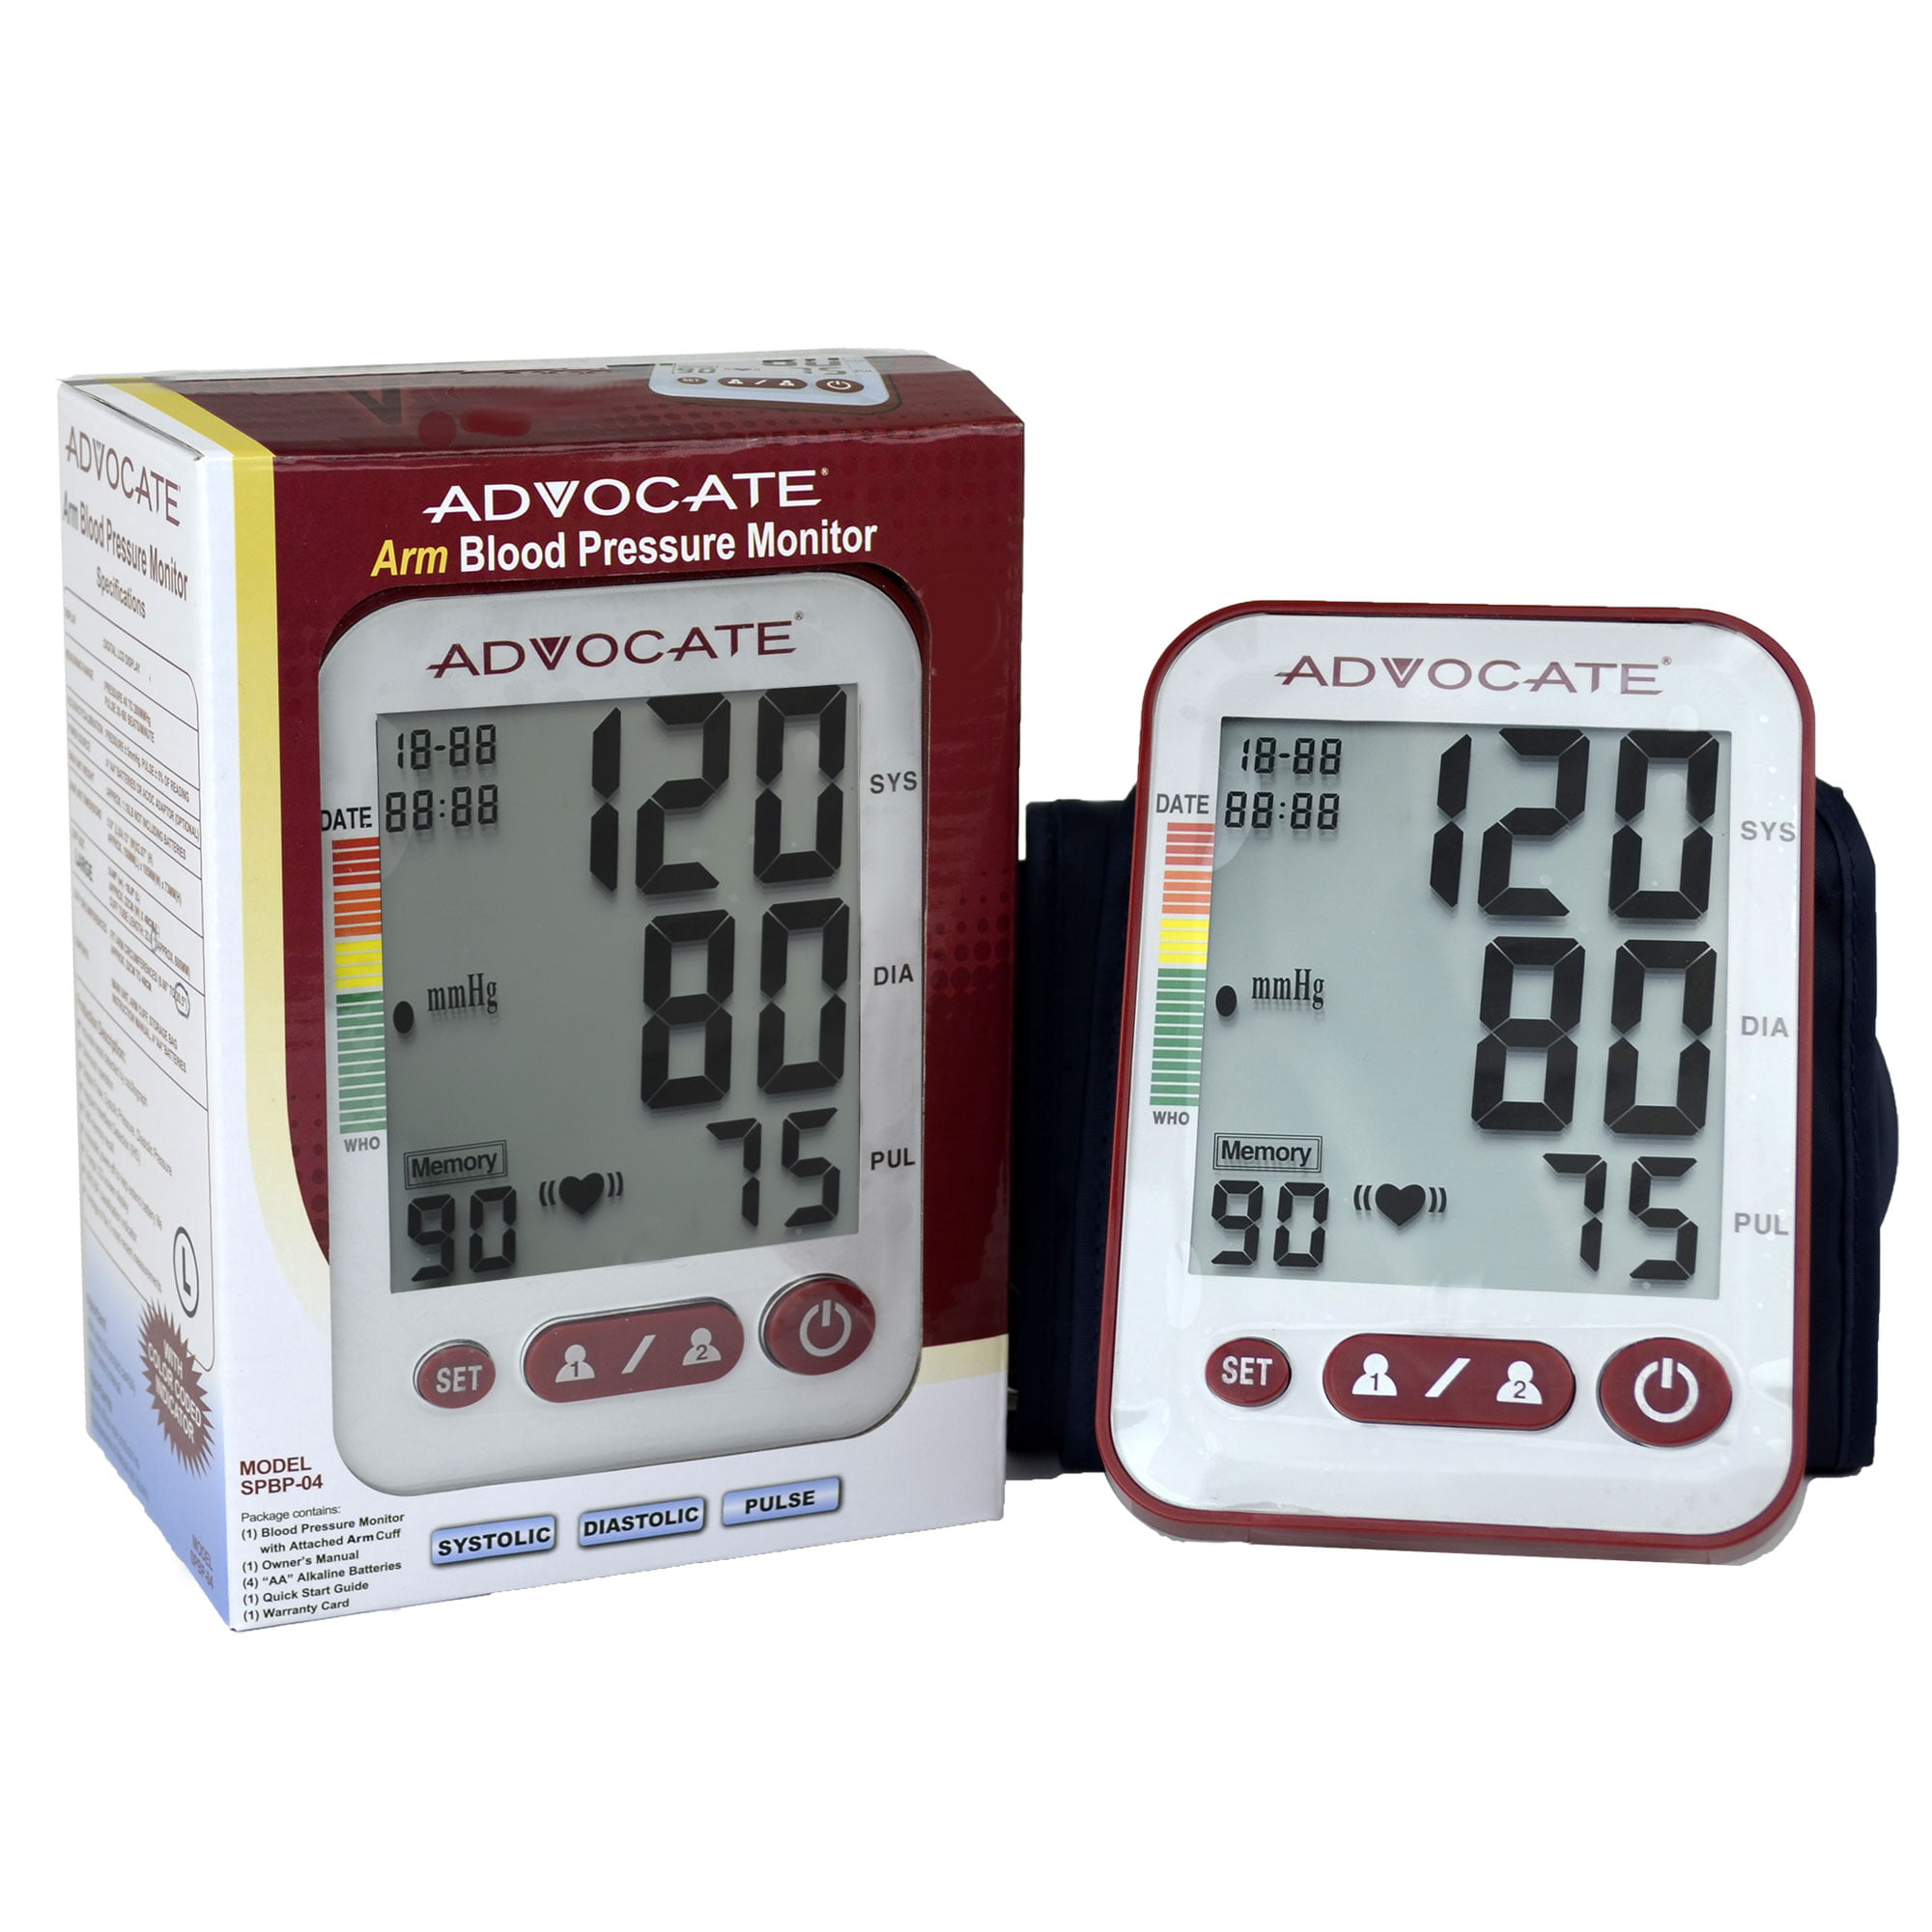 Sound Auction Service - Auction: 04/25/19 Watts, Goebel & Others Estate  Auction ITEM: A&D Medical Multi-User Blood Pressure Monitor